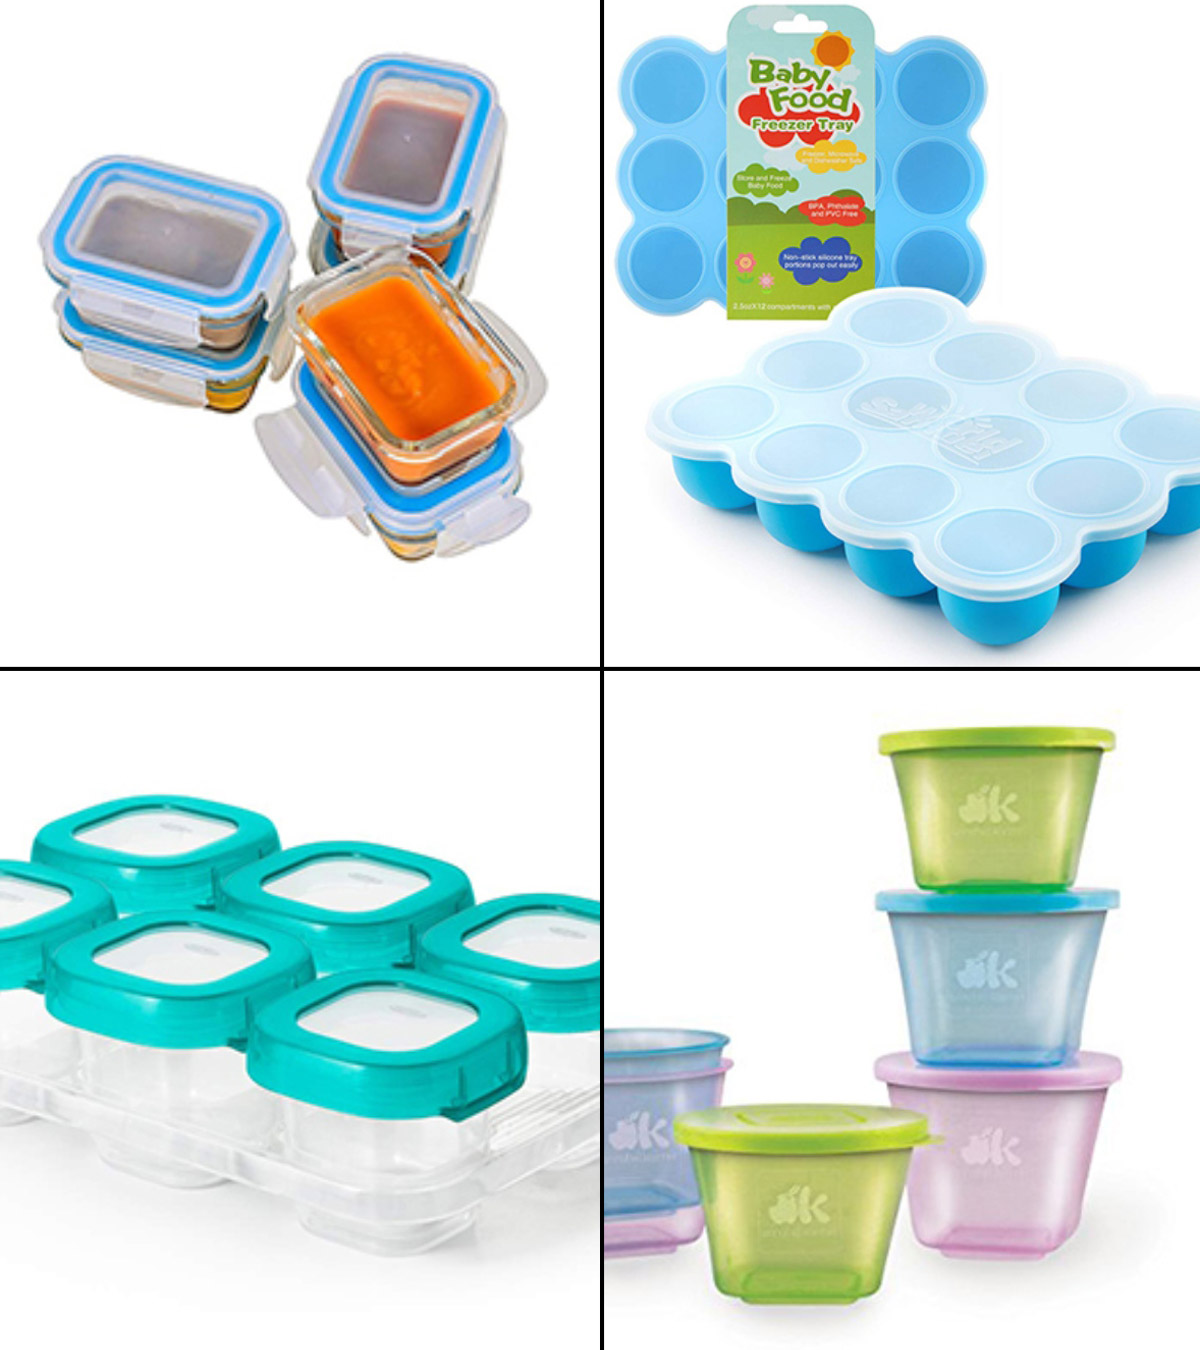 https://www.momjunction.com/wp-content/uploads/2020/04/Food-Storage-Containers1.jpg